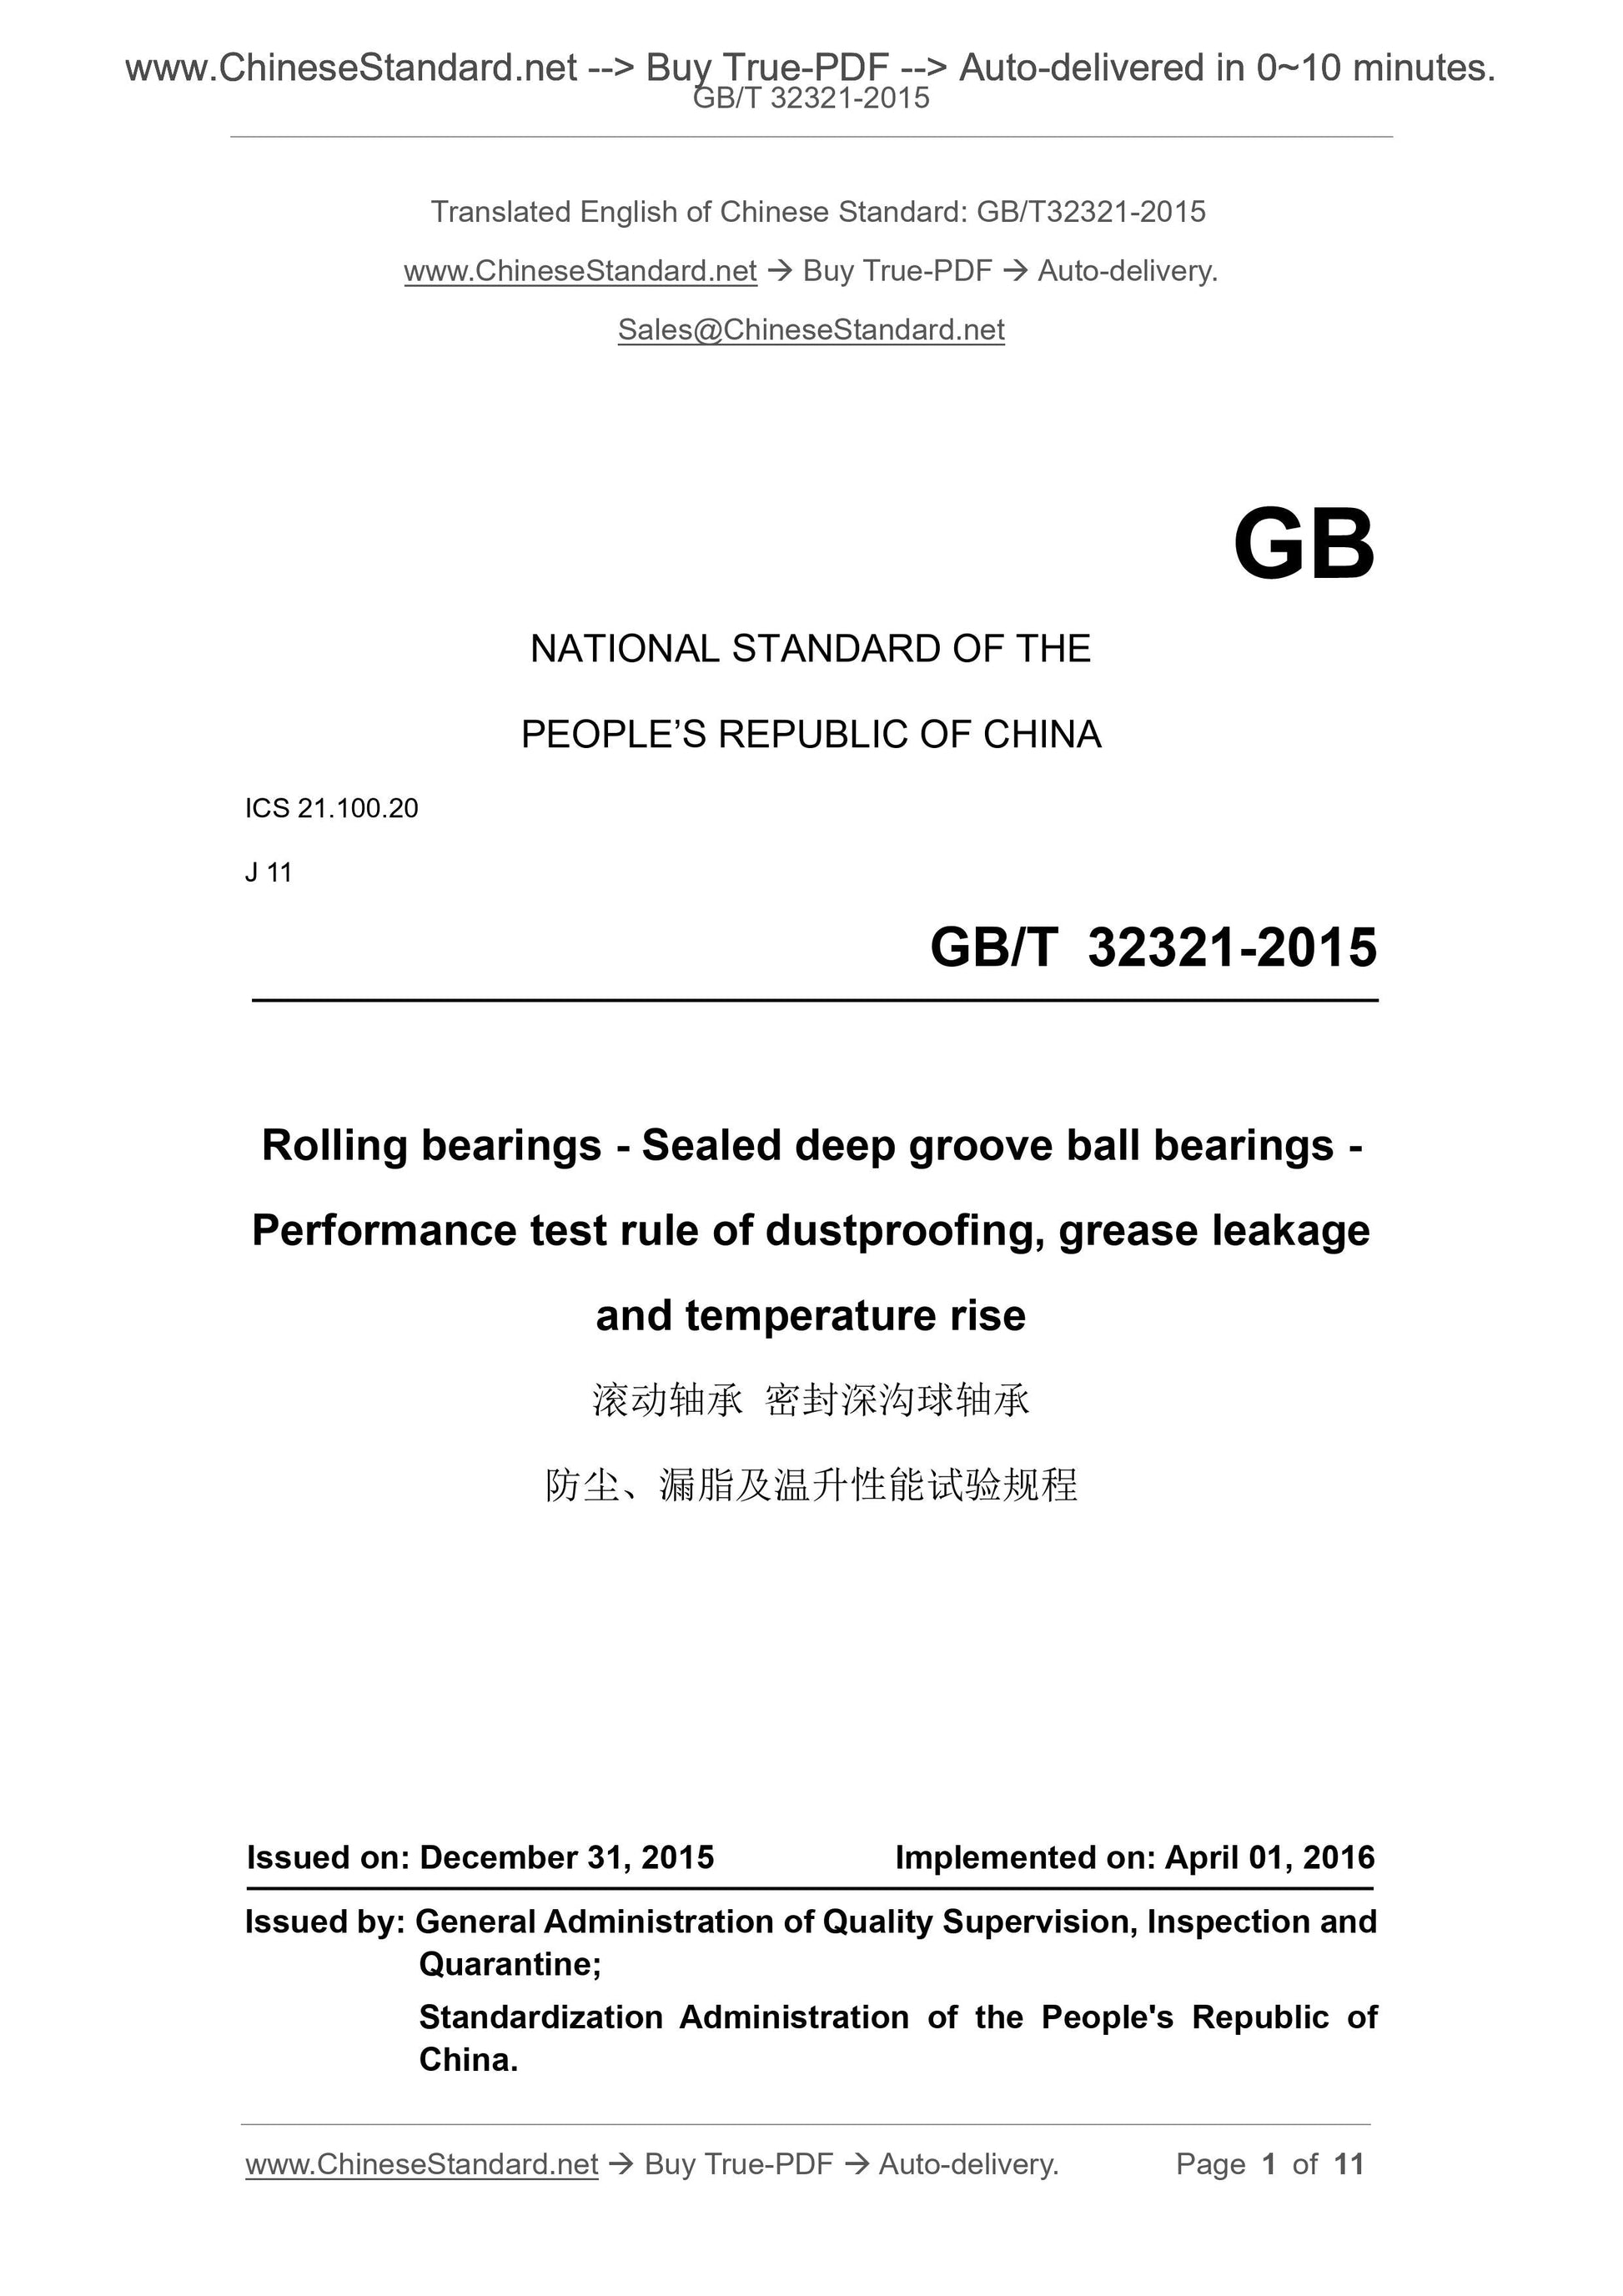 GB/T 32321-2015 Page 1